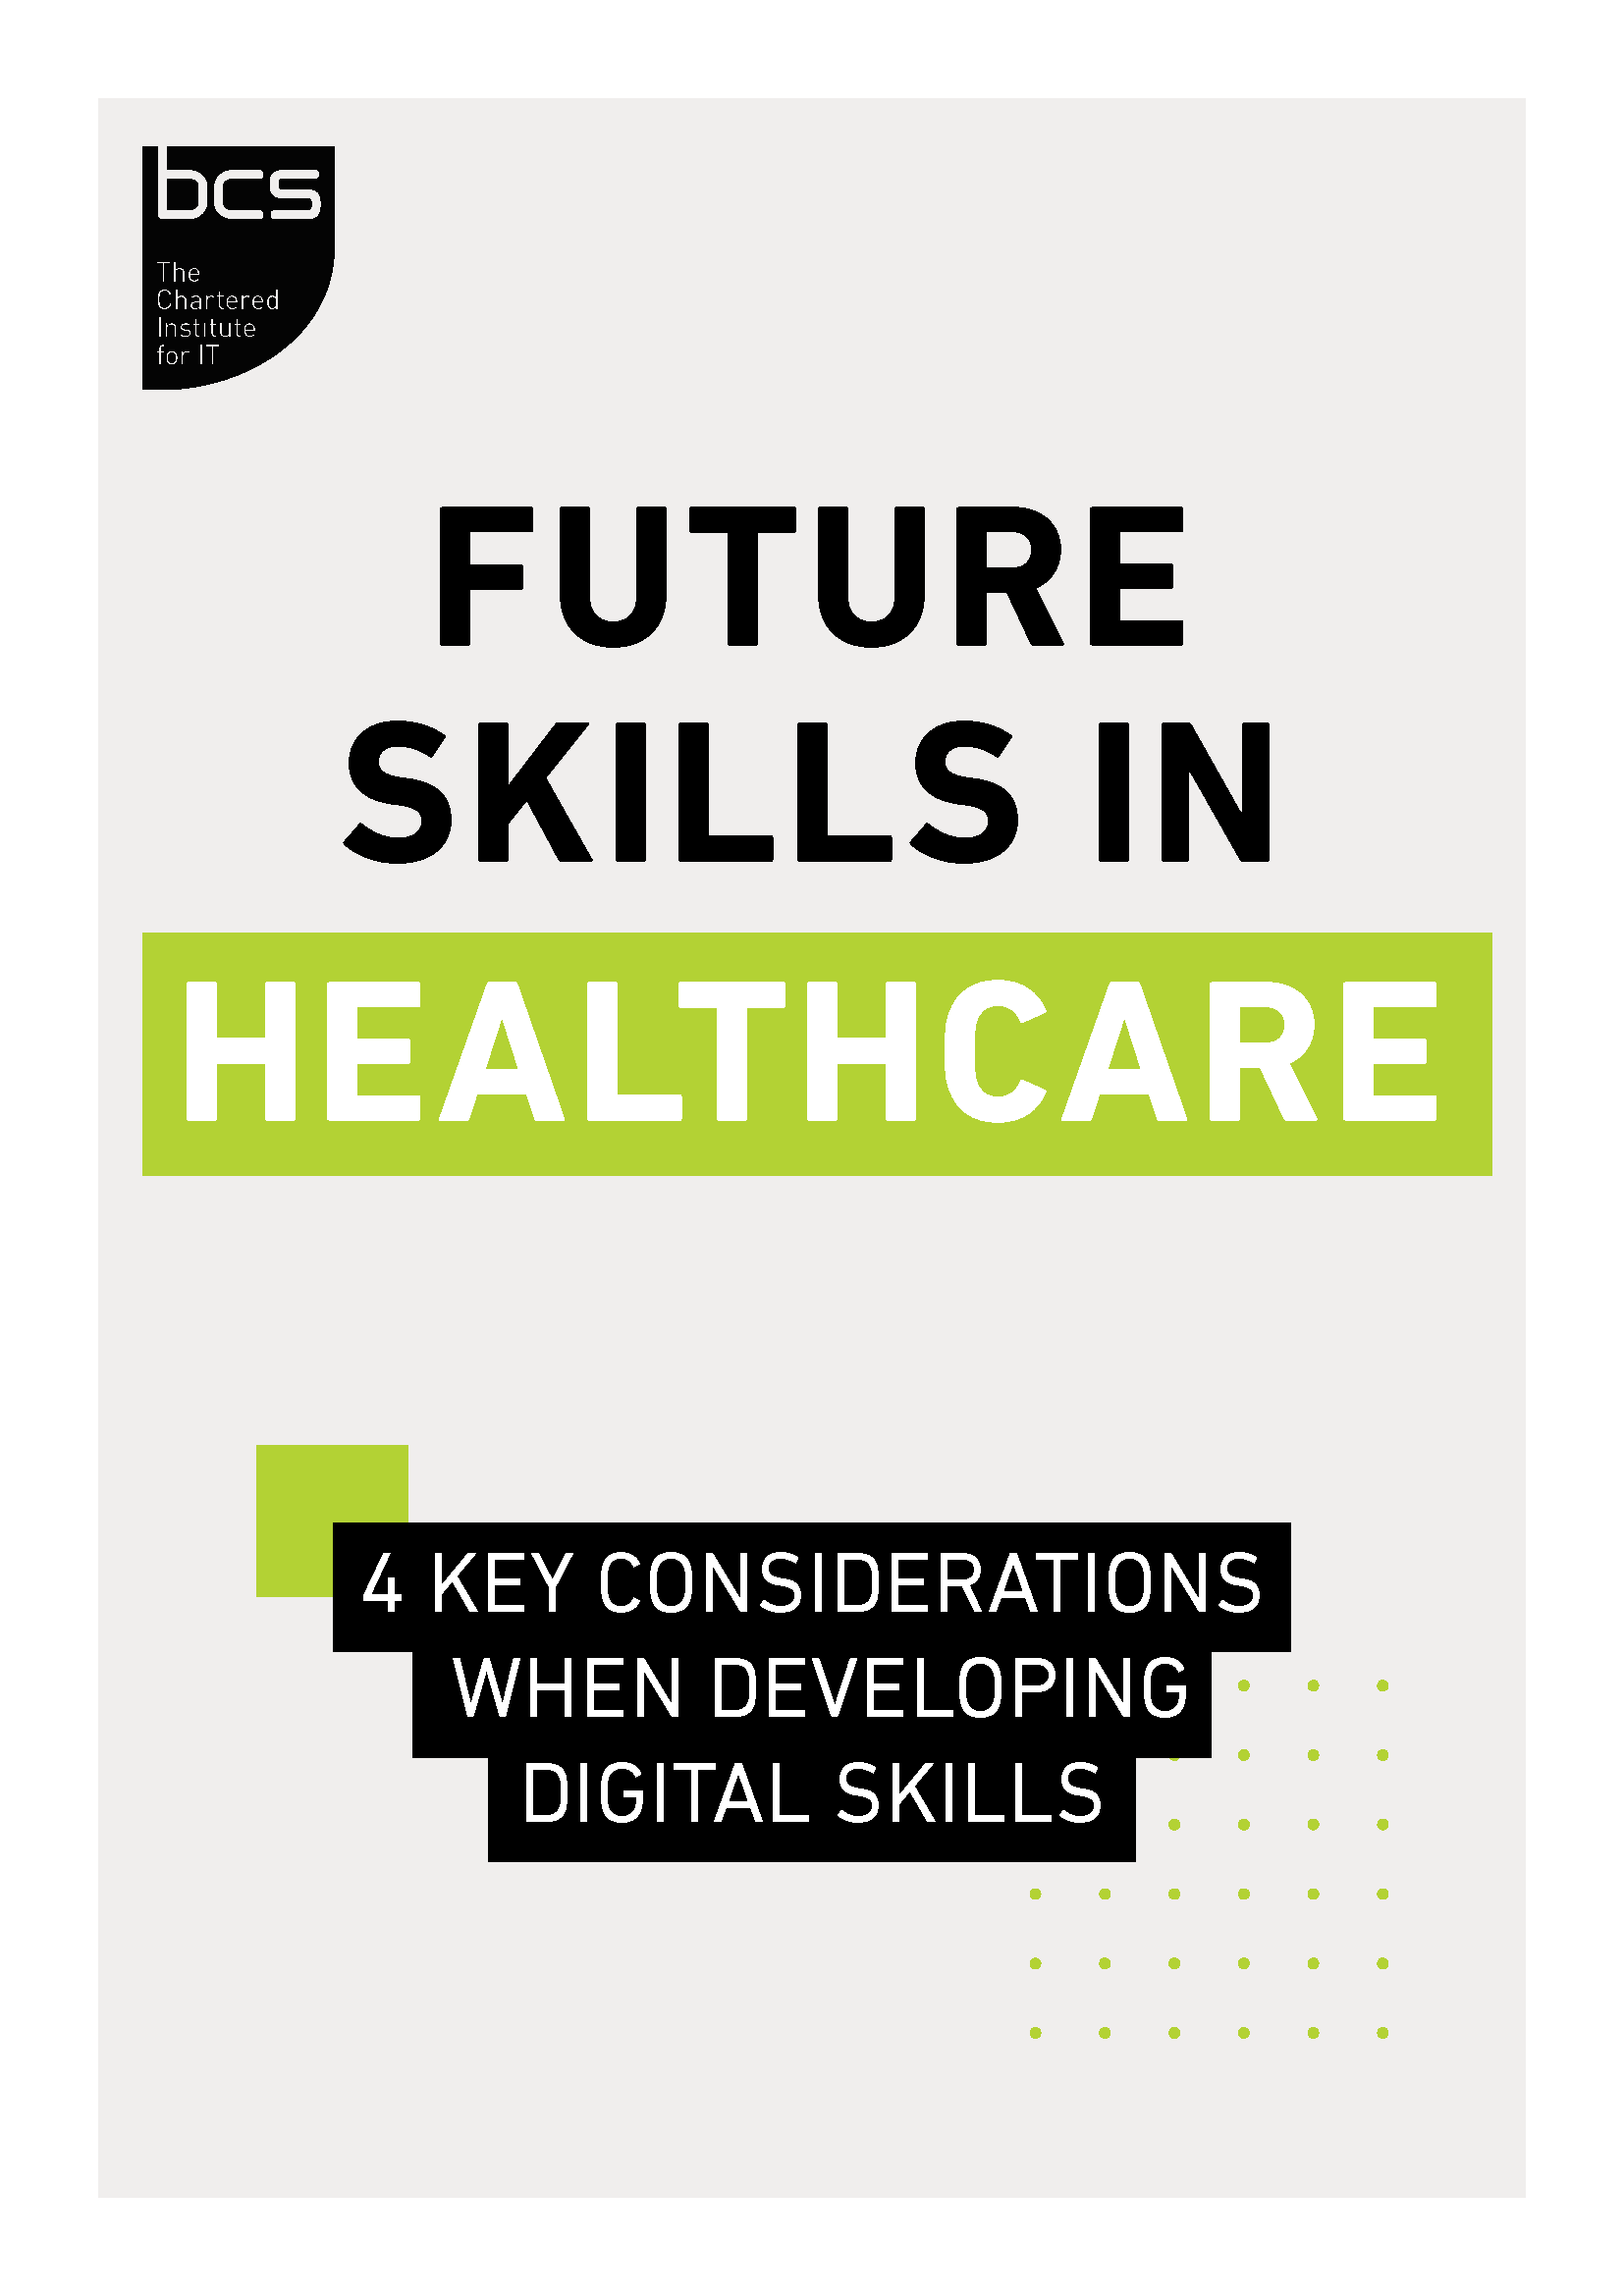 The Guide to Developing Future Digital Skills in Health and Care